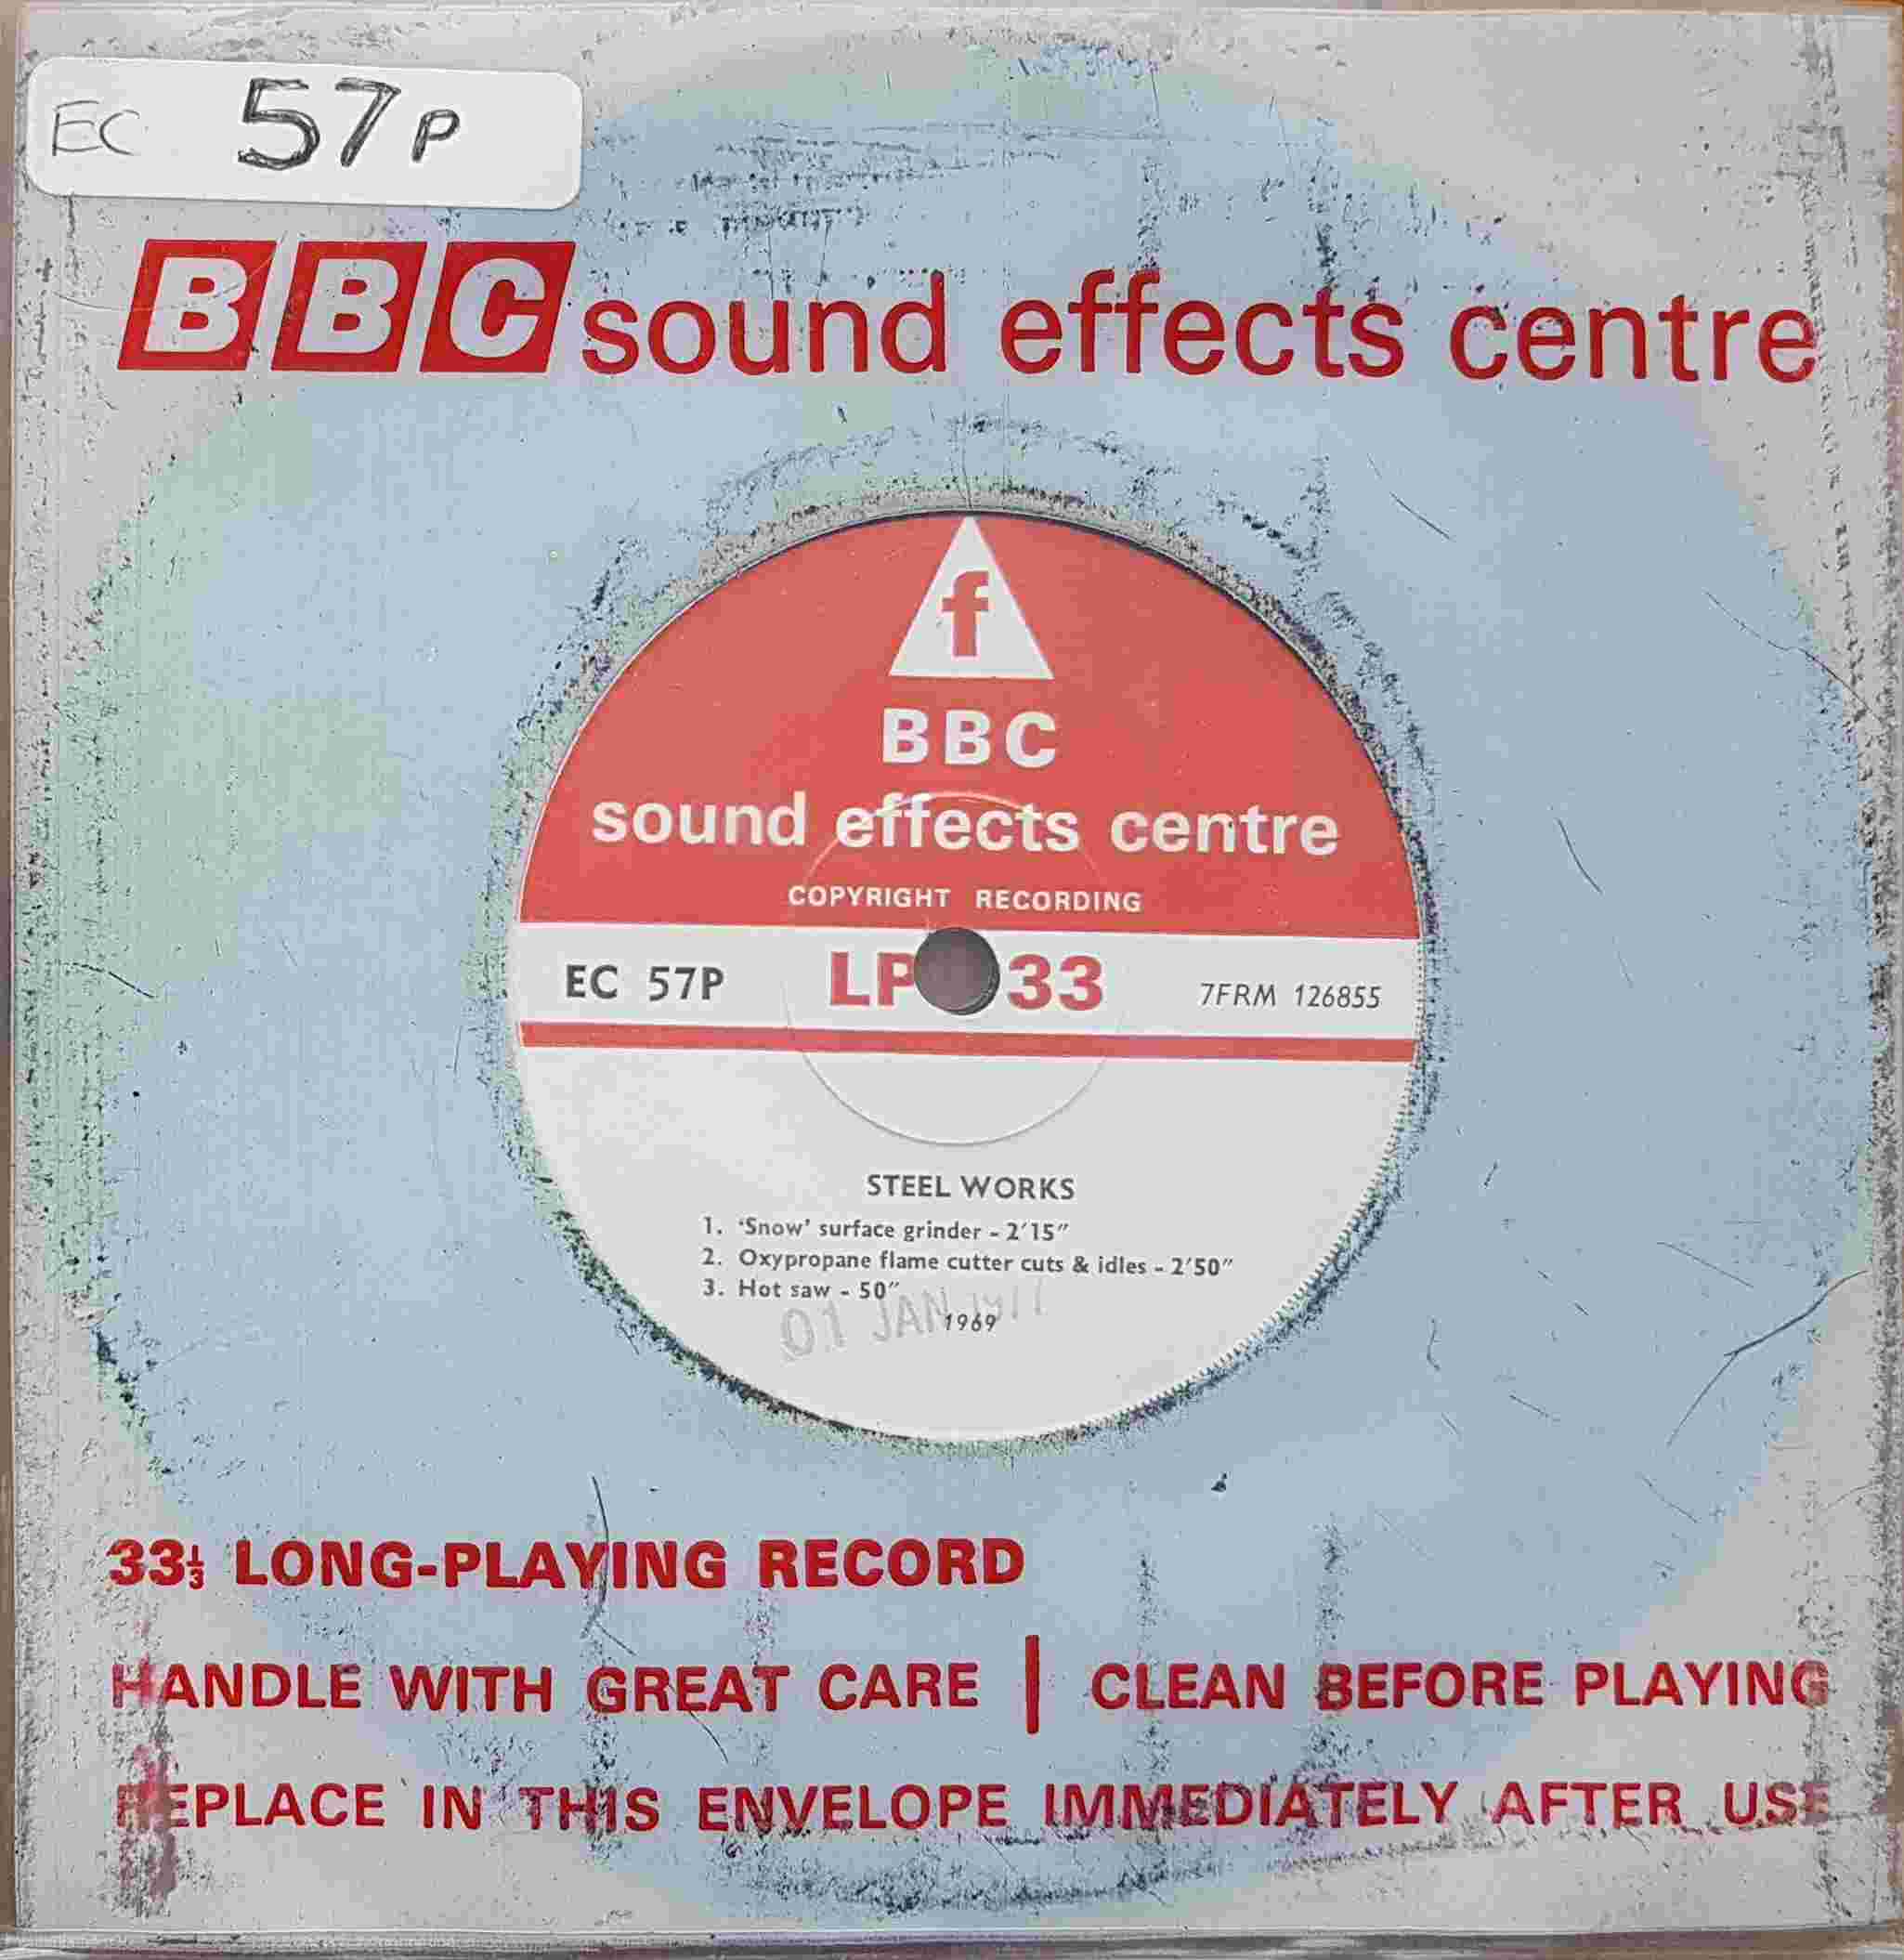 Picture of EC 57P Steel works by artist Not registered from the BBC singles - Records and Tapes library